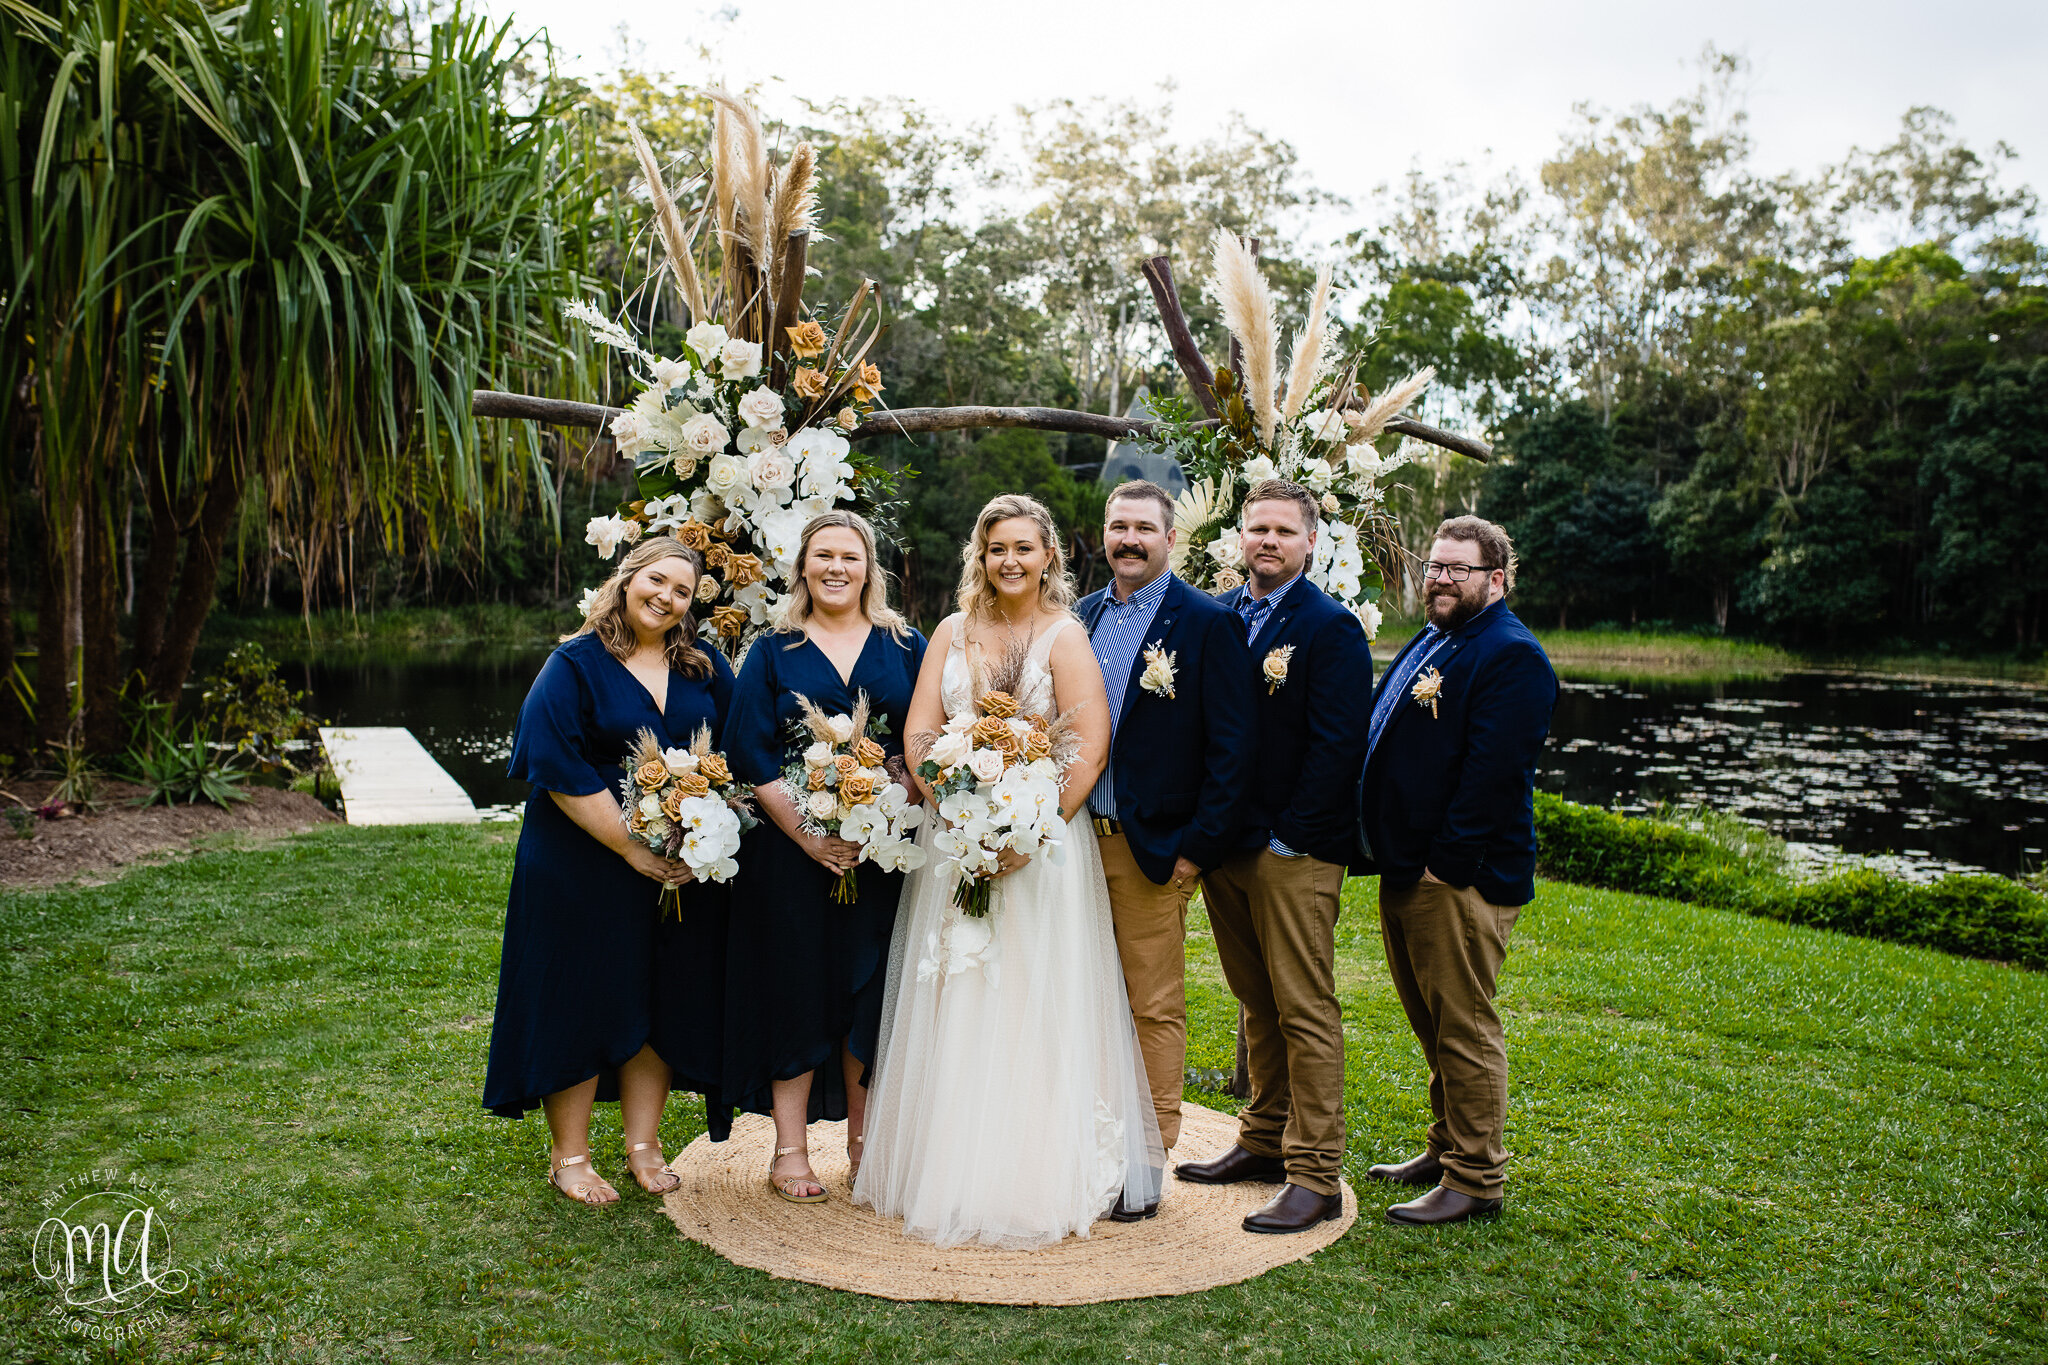 The Bridal party. It's an important job but also a fun job! Choose your &quot;I do crew&quot; so that you have the right people around you to make it an even more fun and enjoyable day.